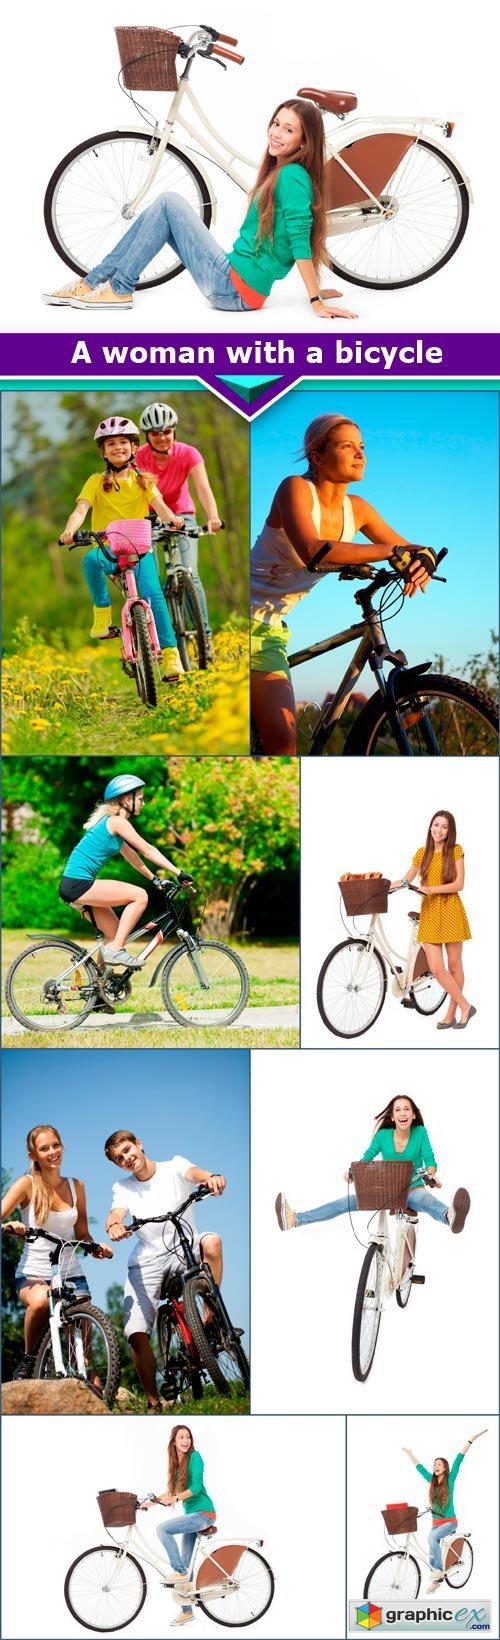 A woman with a bicycle 9x JPEG